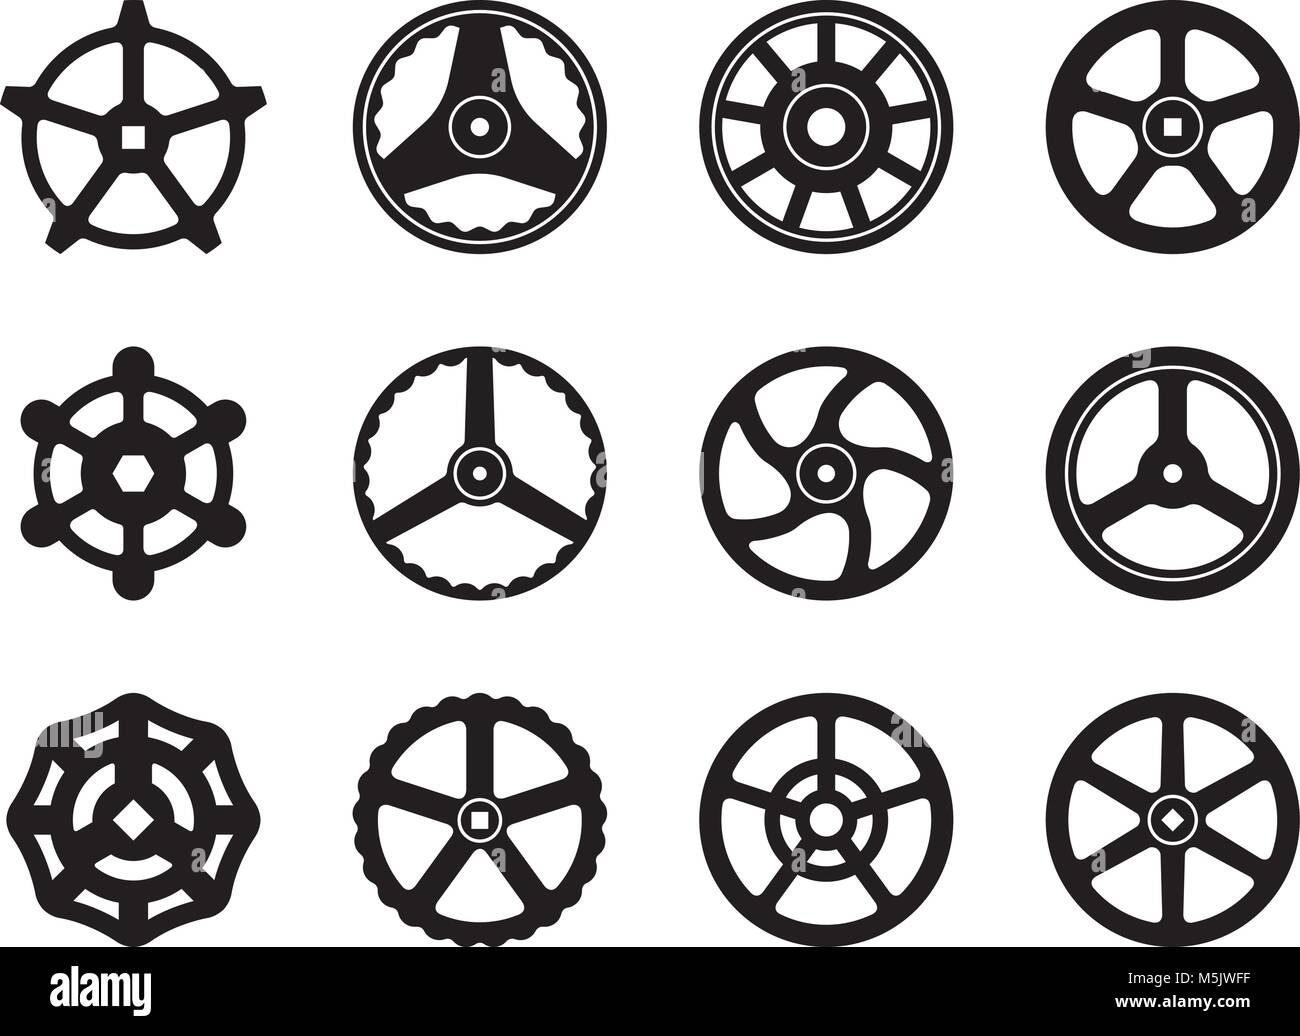 Hand wheel vector icon set. illustration of machinery equipment for adjustment and operation Stock Vector